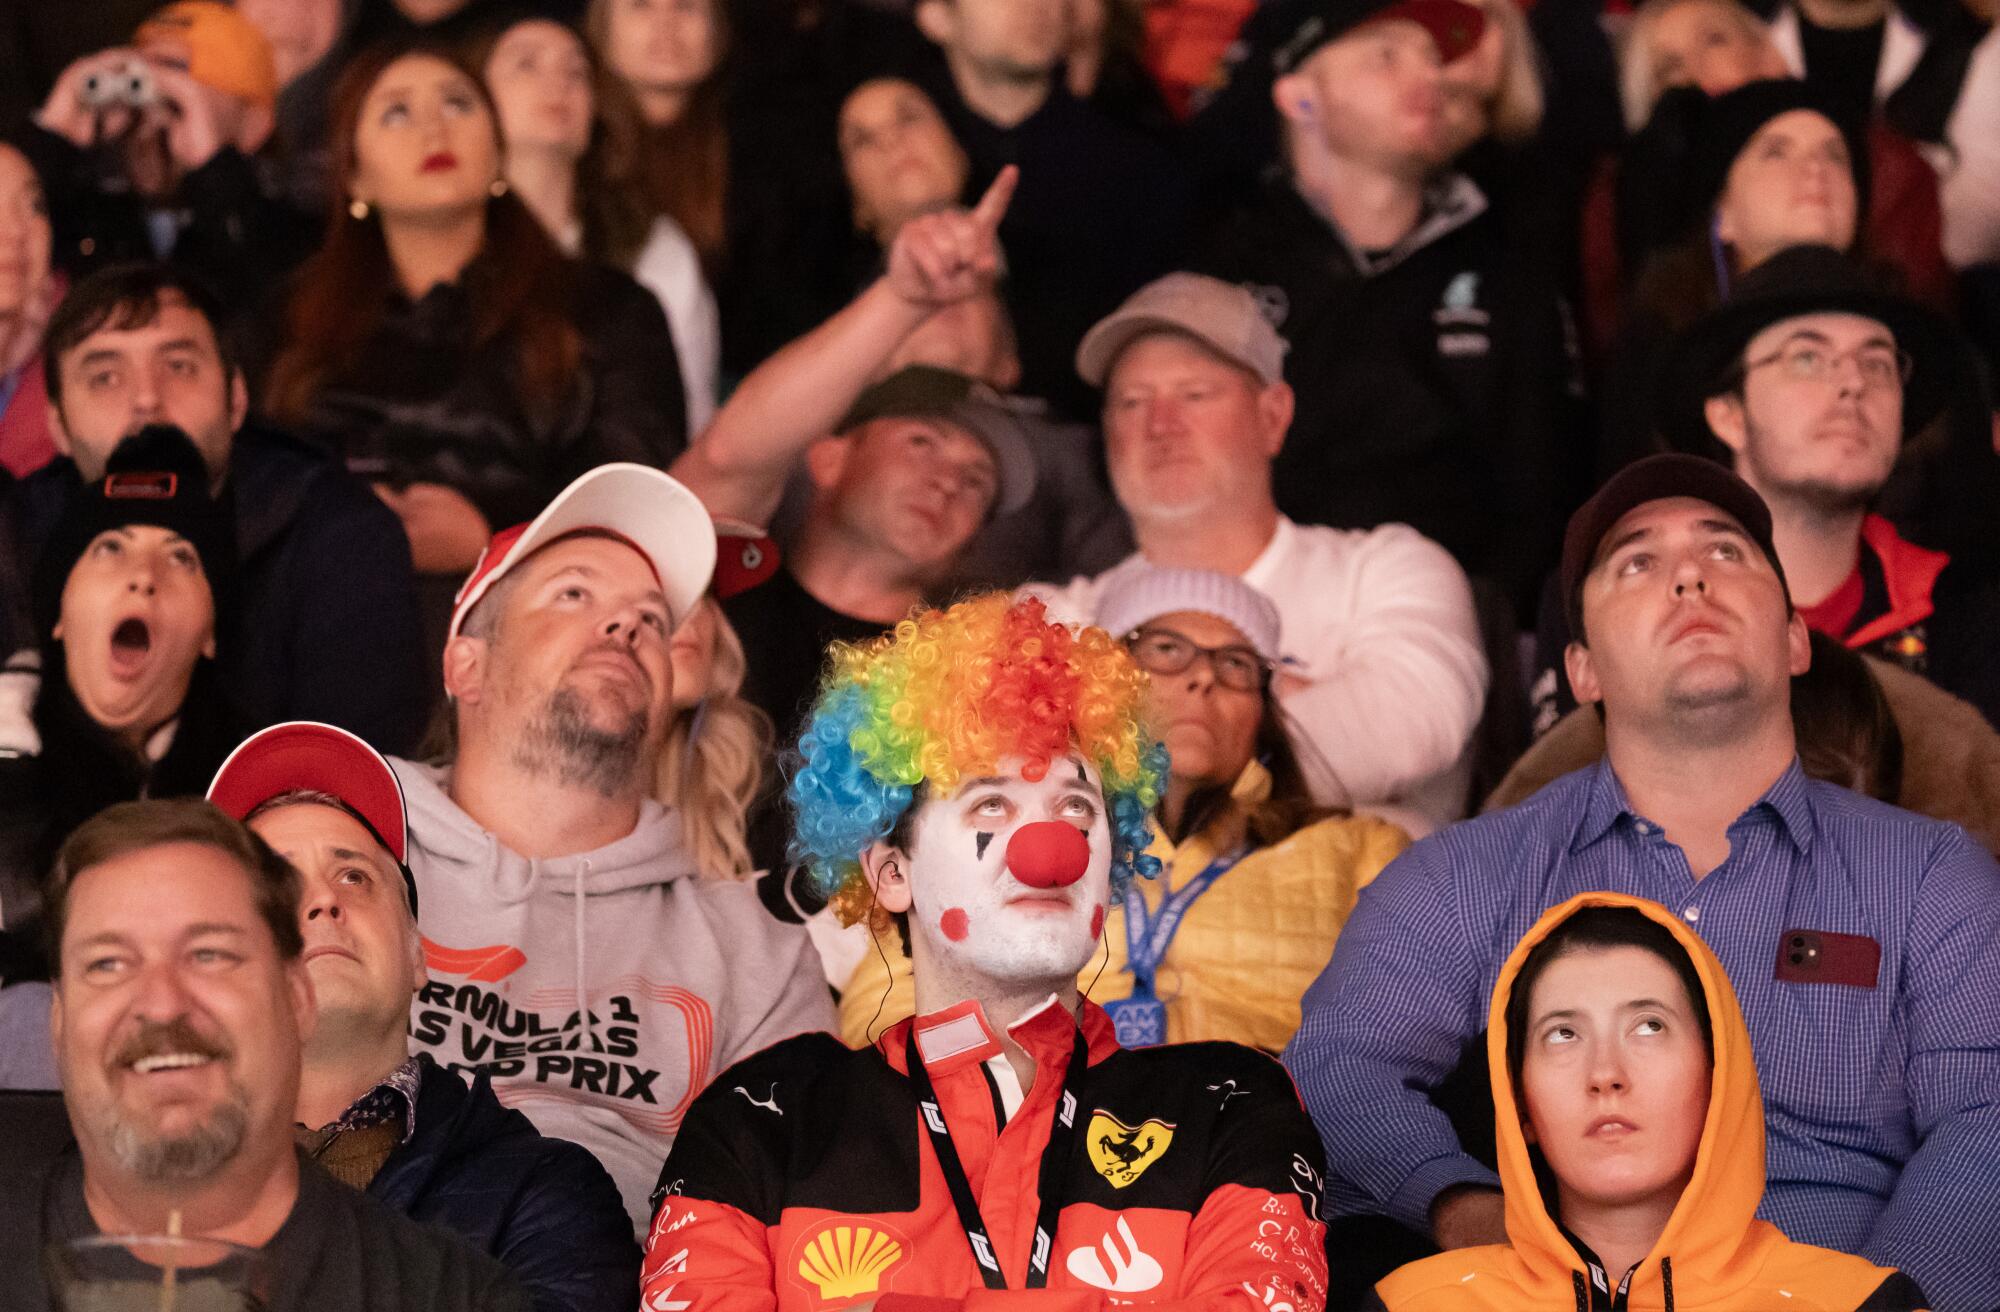 A Ferrari fan in clown makeup watches the qualifying session among spectators.